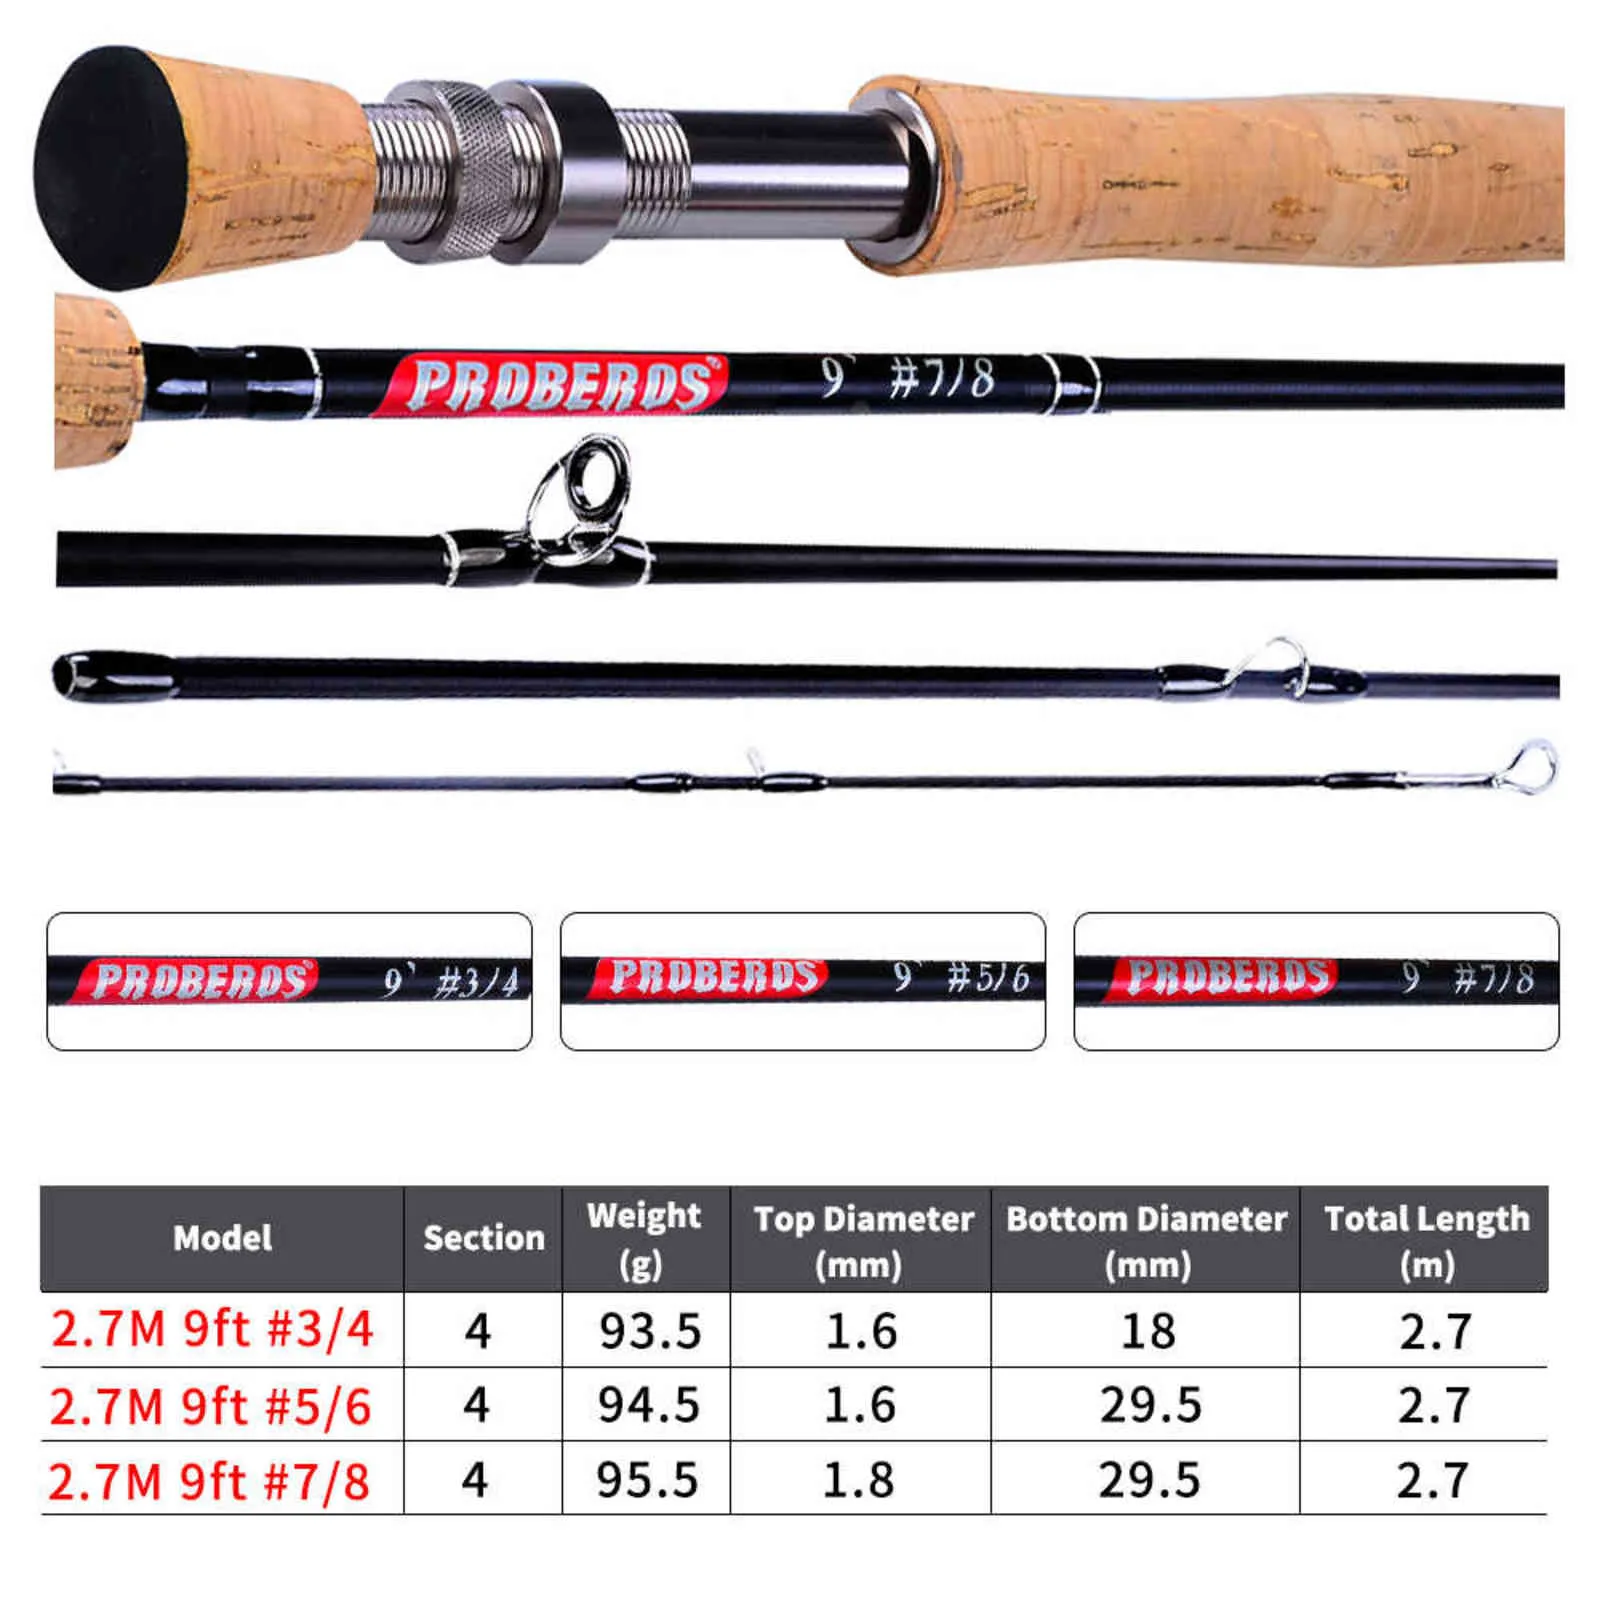 PROBEROS Fly Fishing Outfit 7FT/9FT, 2.1M/2.7M, 4 Sections, Line Wt 3/4/5/6/ 7/8, Soft Cork Handle Tackle From Long07, $23.65